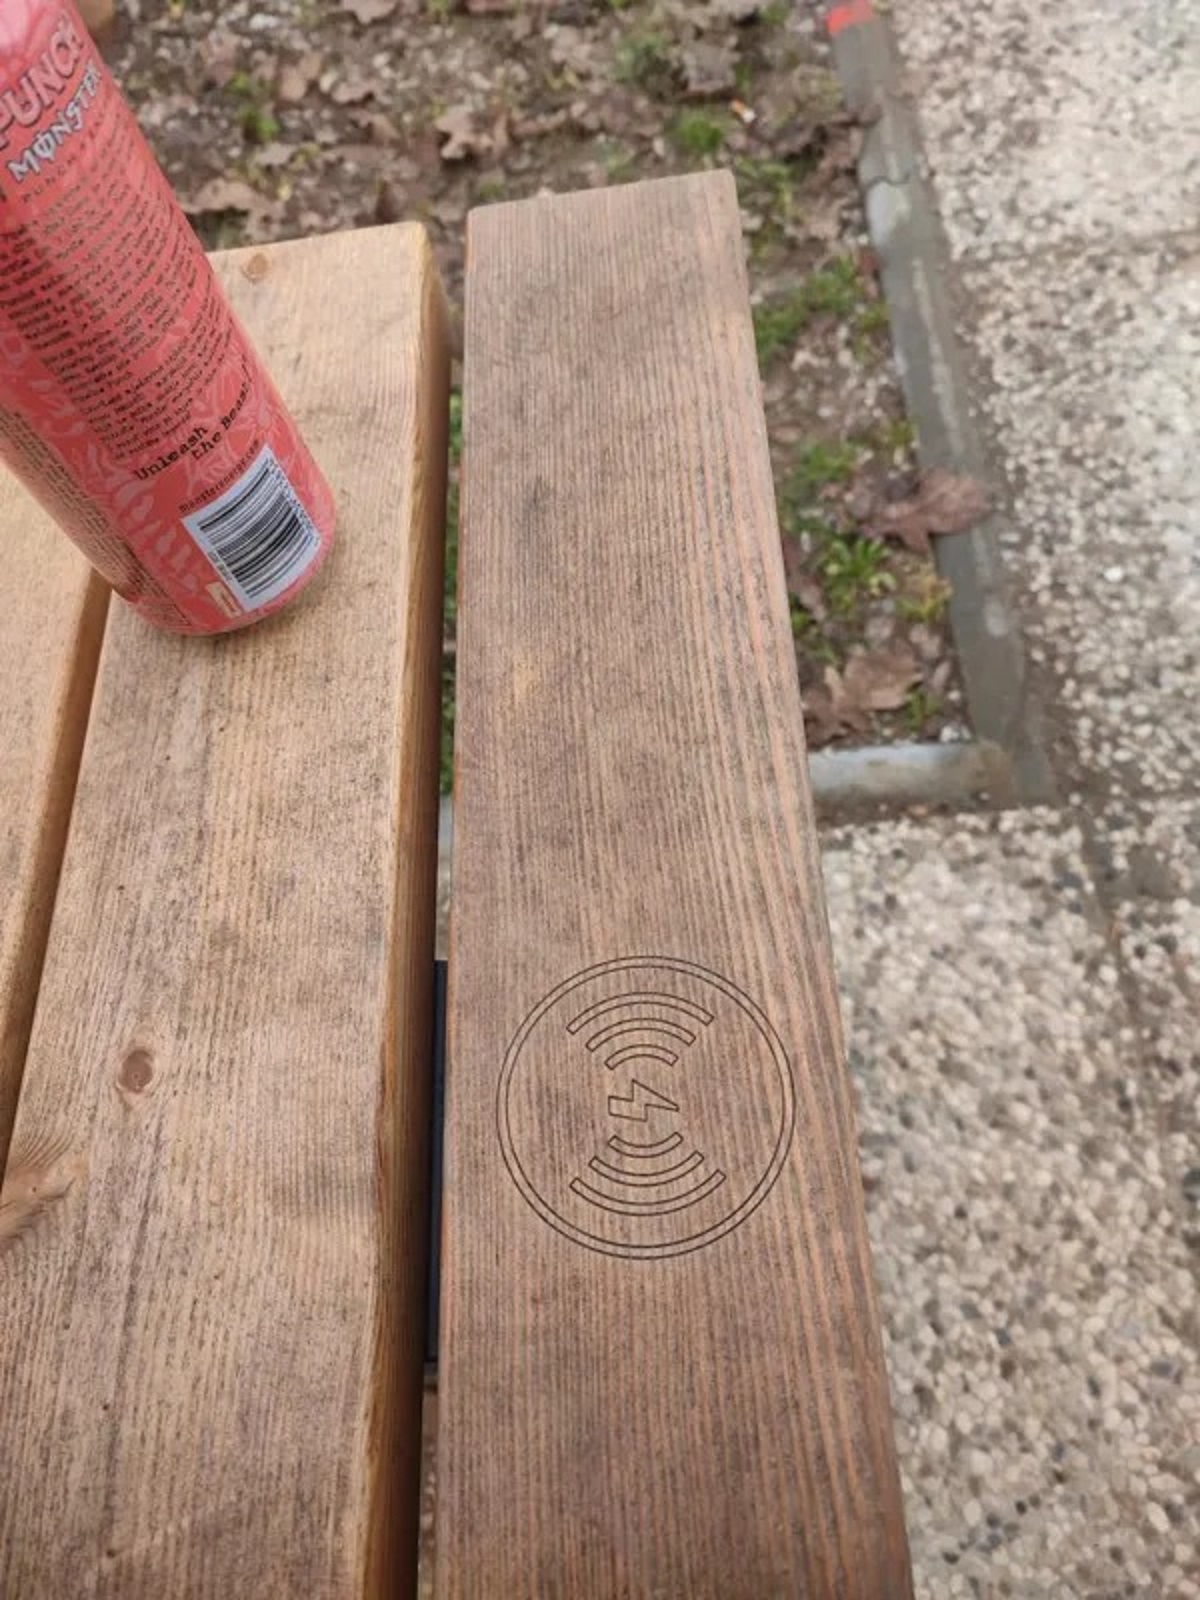 A few benches in my city have wireless Qi pads and USB power ports on them.